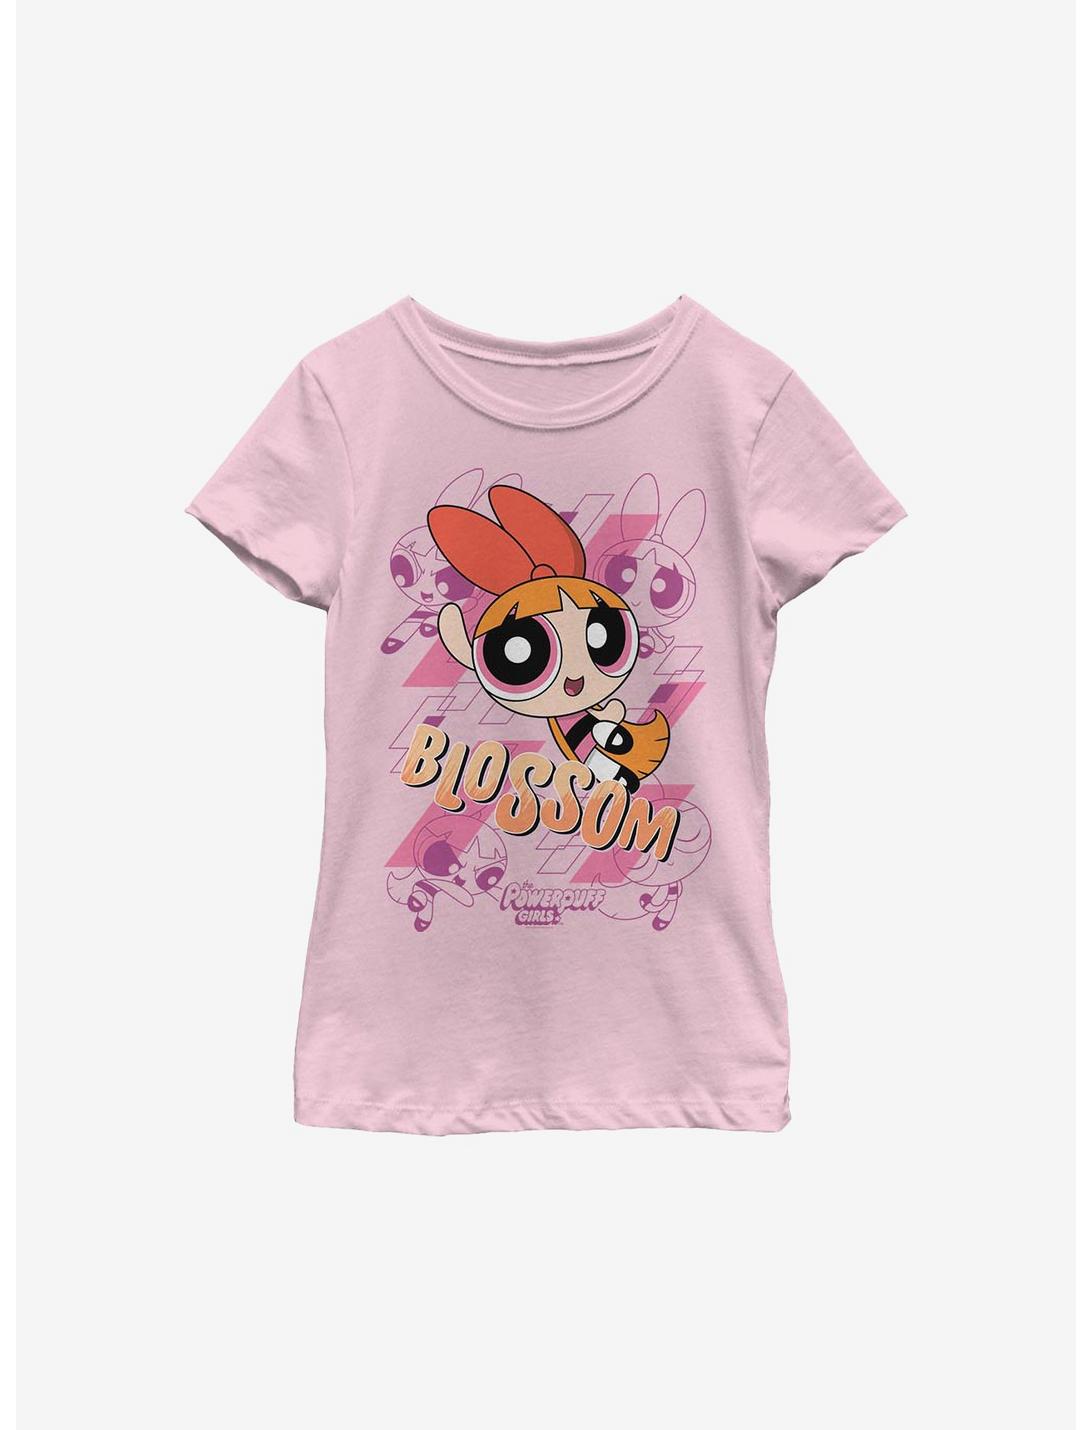 The Powerpuff Girls Blossom Moves Youth Girls T-Shirt, PINK, hi-res